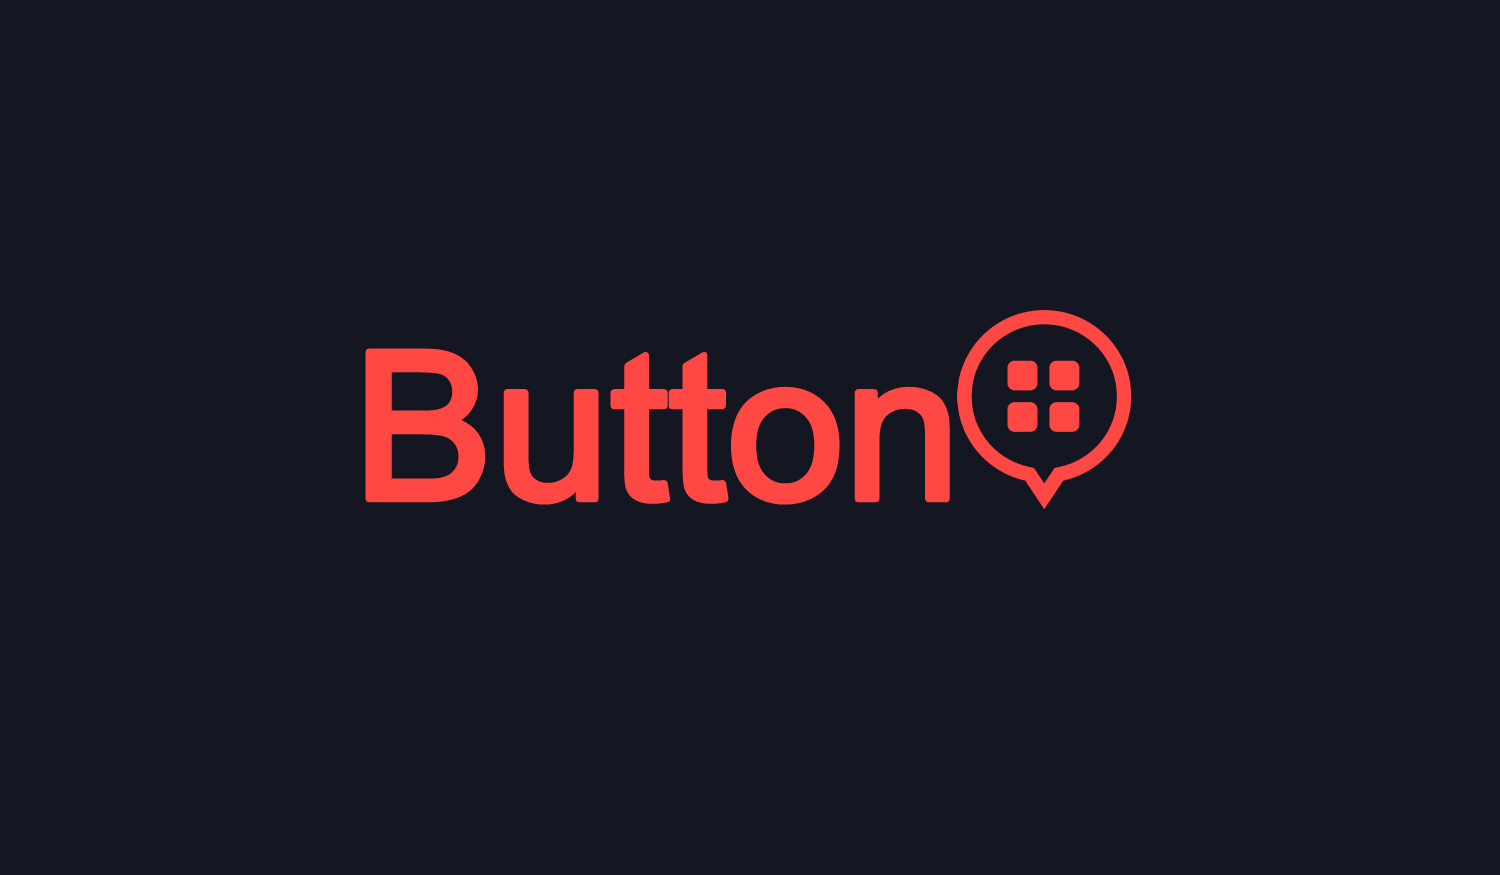 Button gets data pipelines to launch new brands